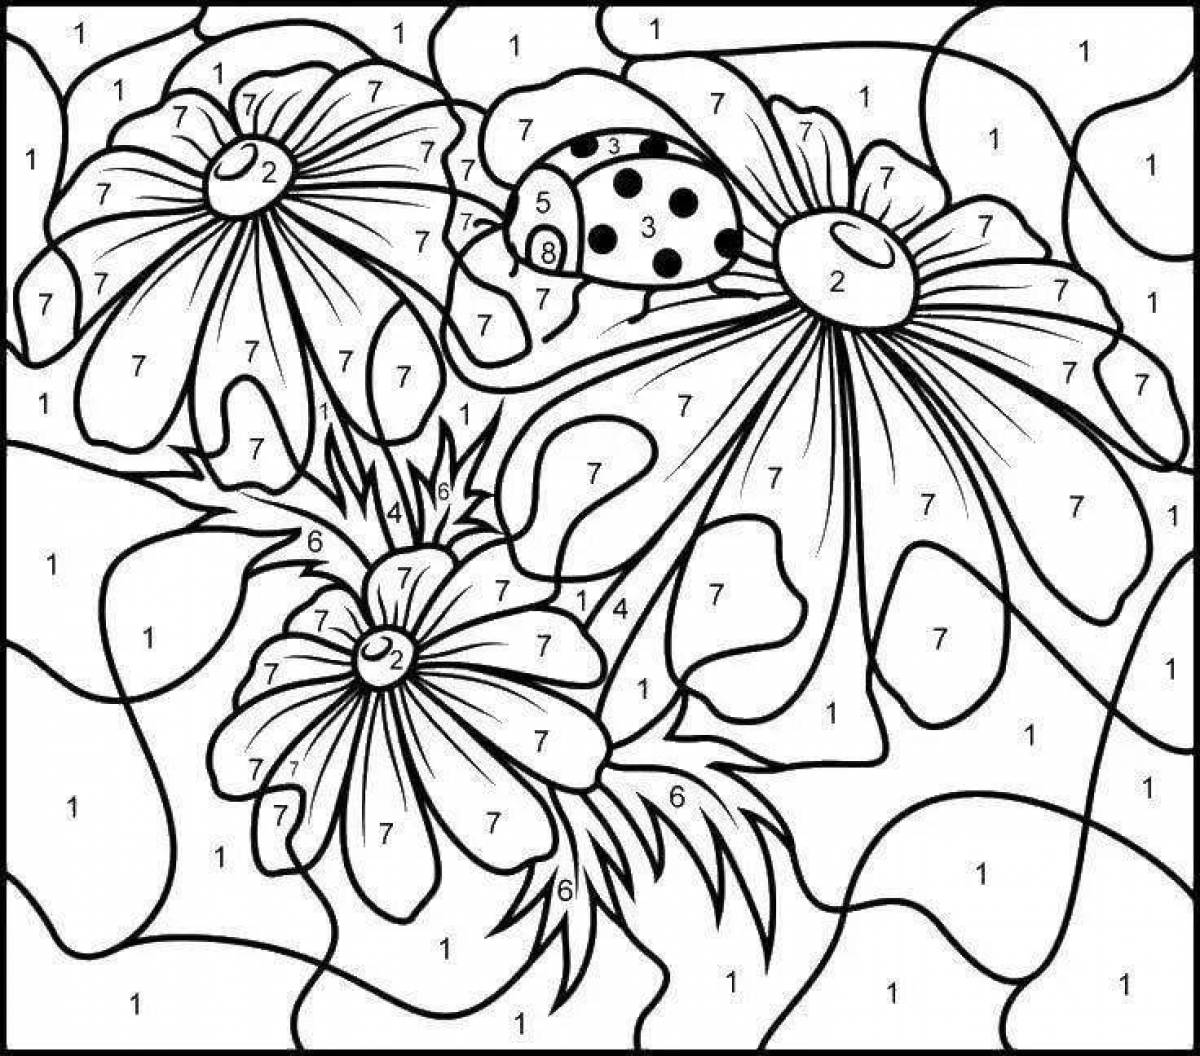 Colorful coloring pages